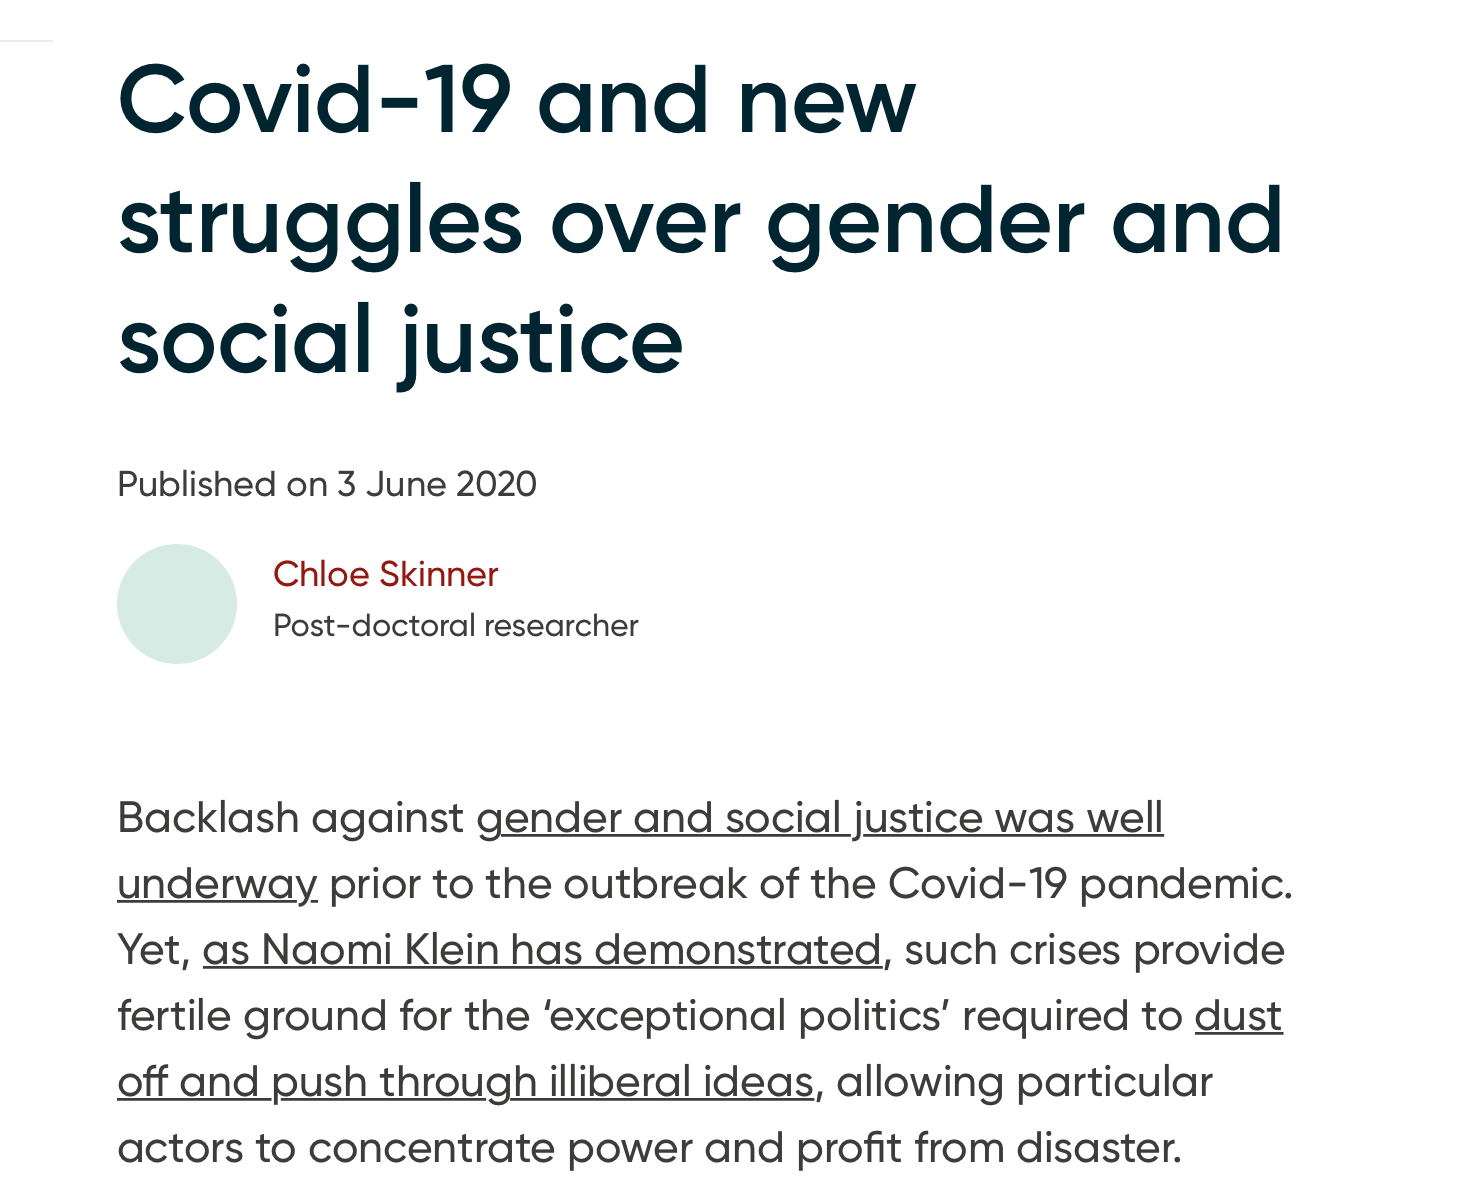 COVID-19 and new struggles over gender and social justice